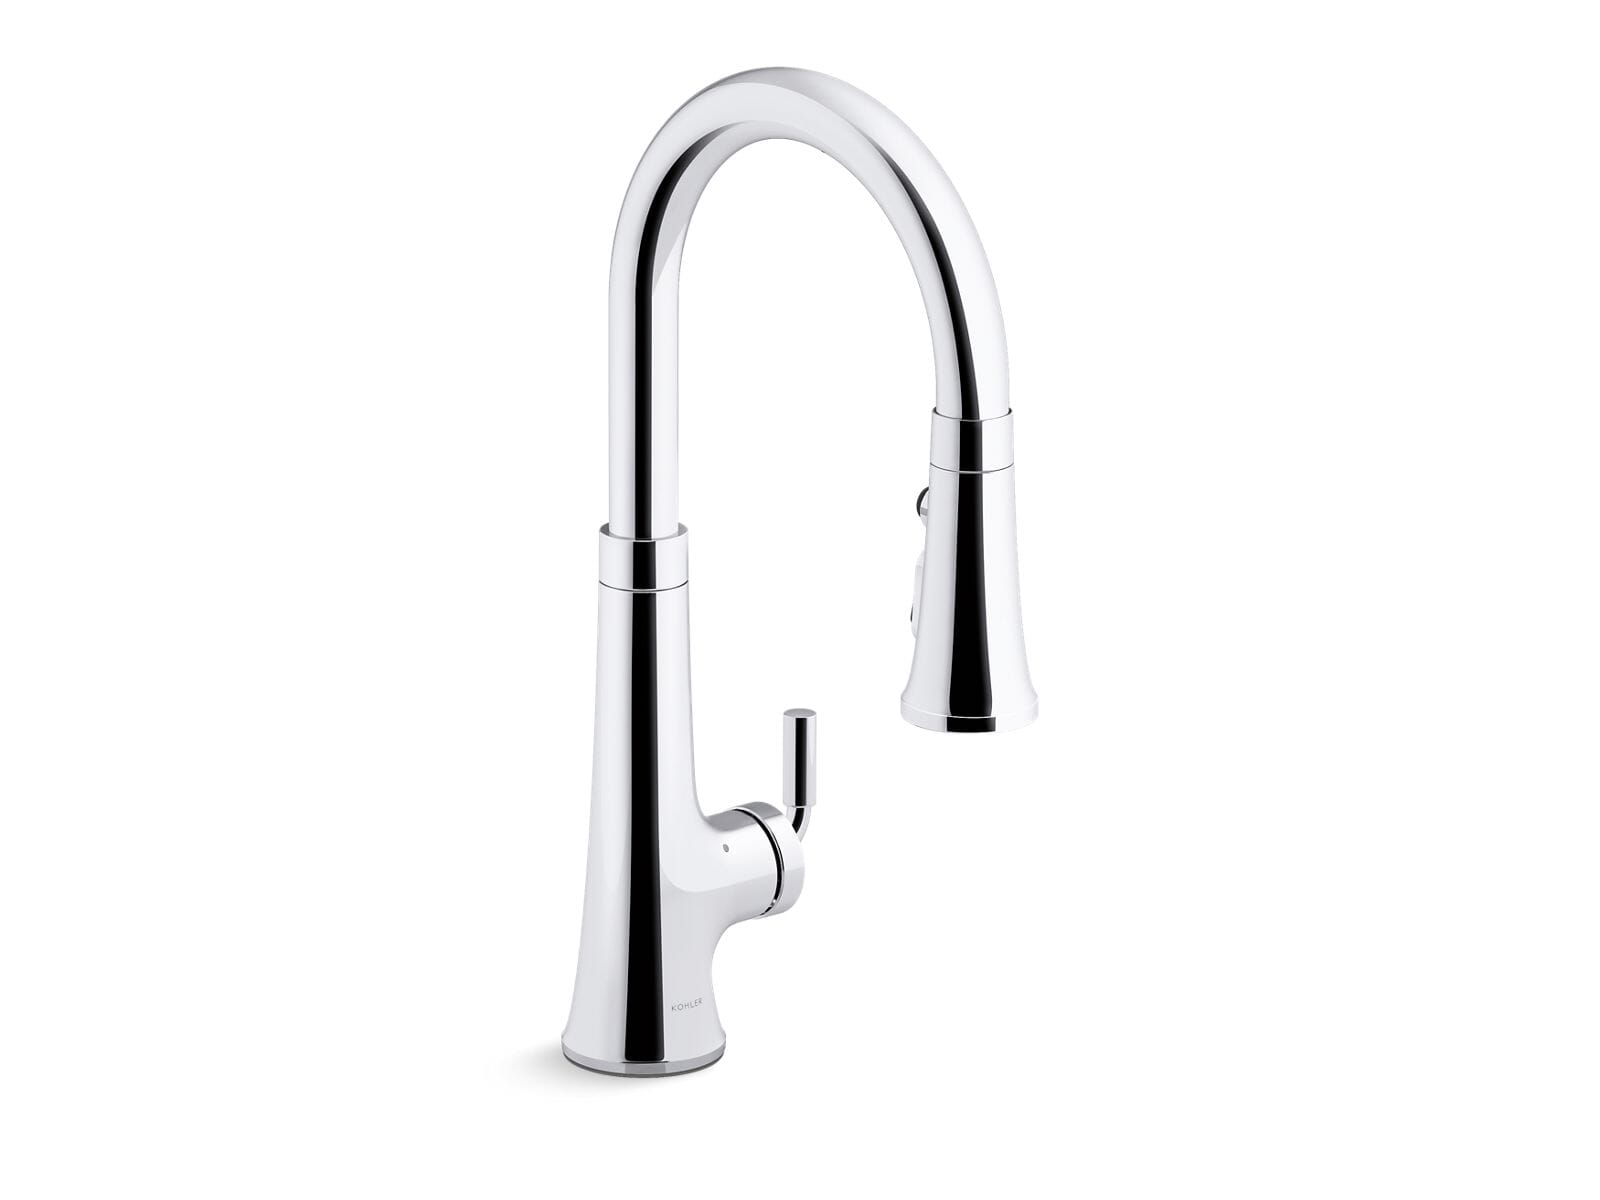 Tone® Touchless pull-down kitchen sink faucet with three-function sprayhead